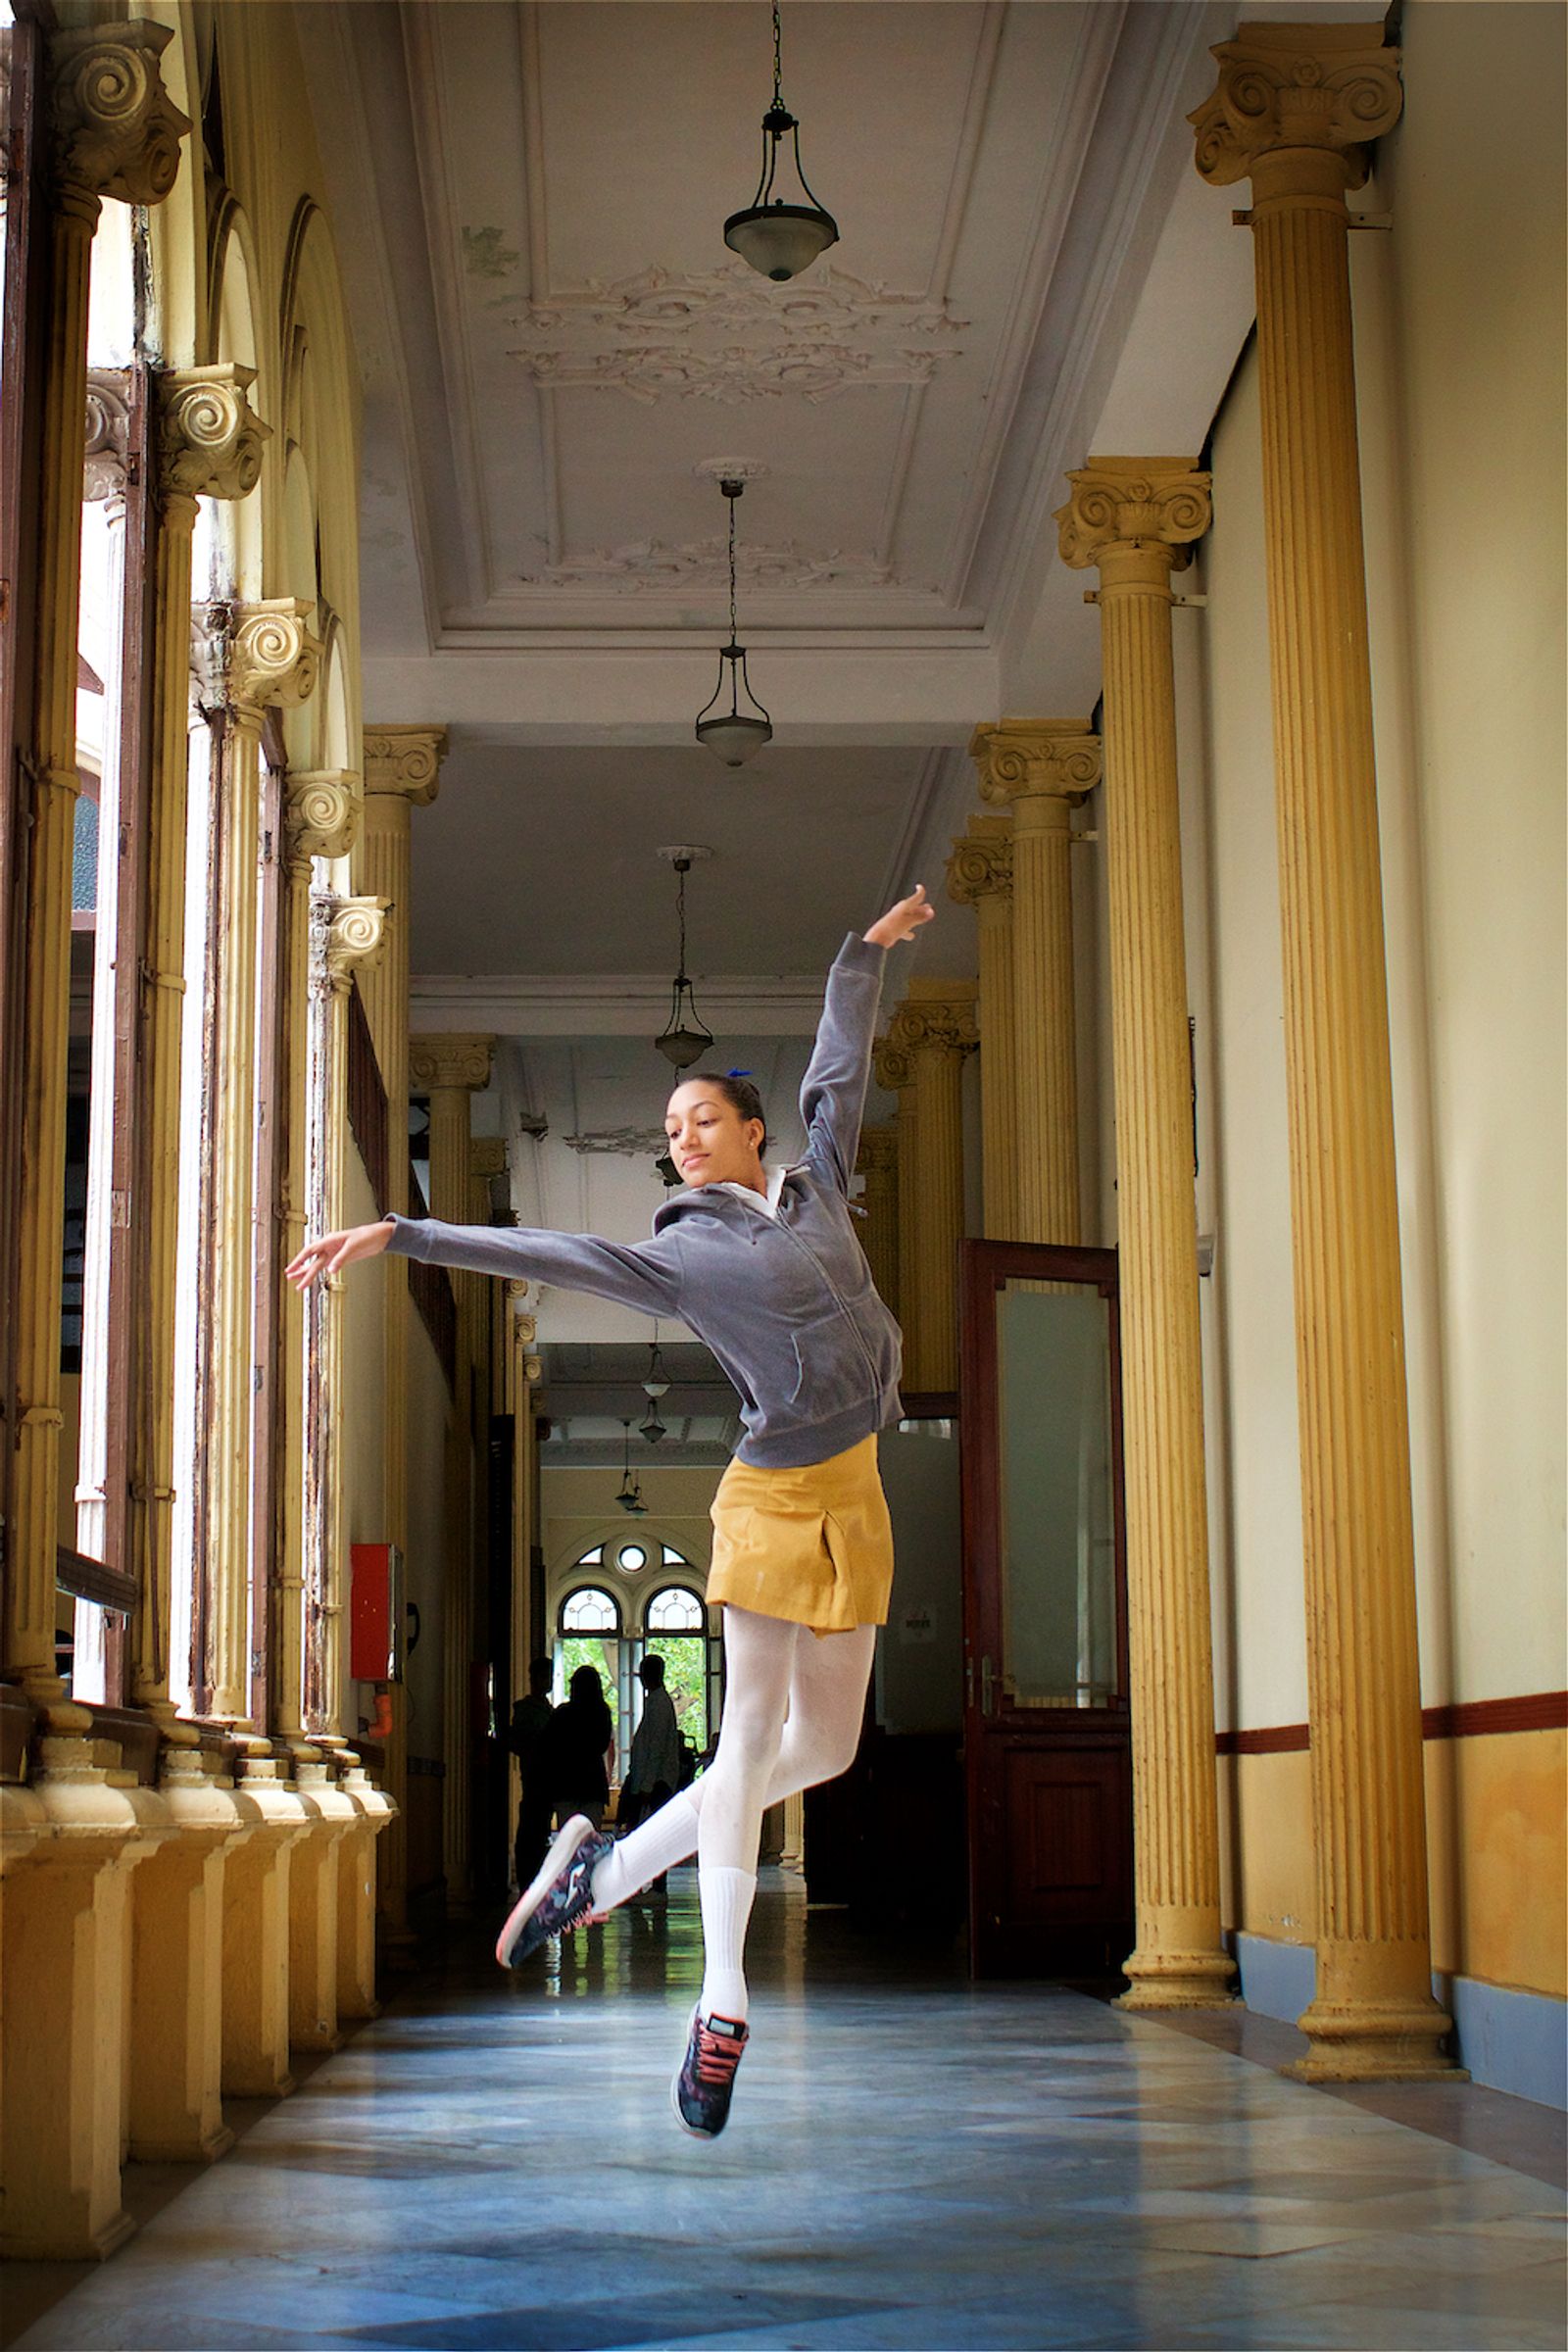 © Tina Gutierrez - Image from the Cuba National School of Ballet photography project